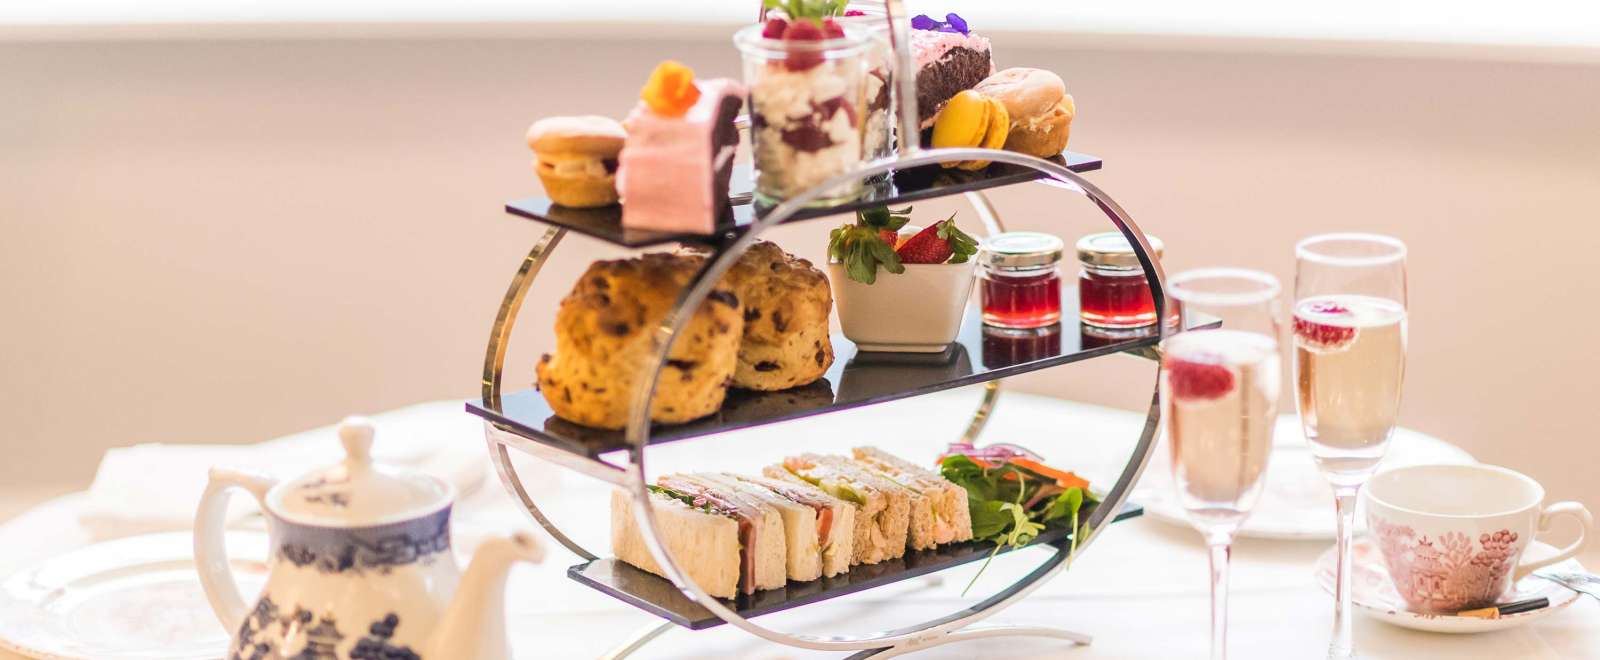 Royal and Fortescue Hotel Restaurant Dining Afternoon Tea with Prosecco